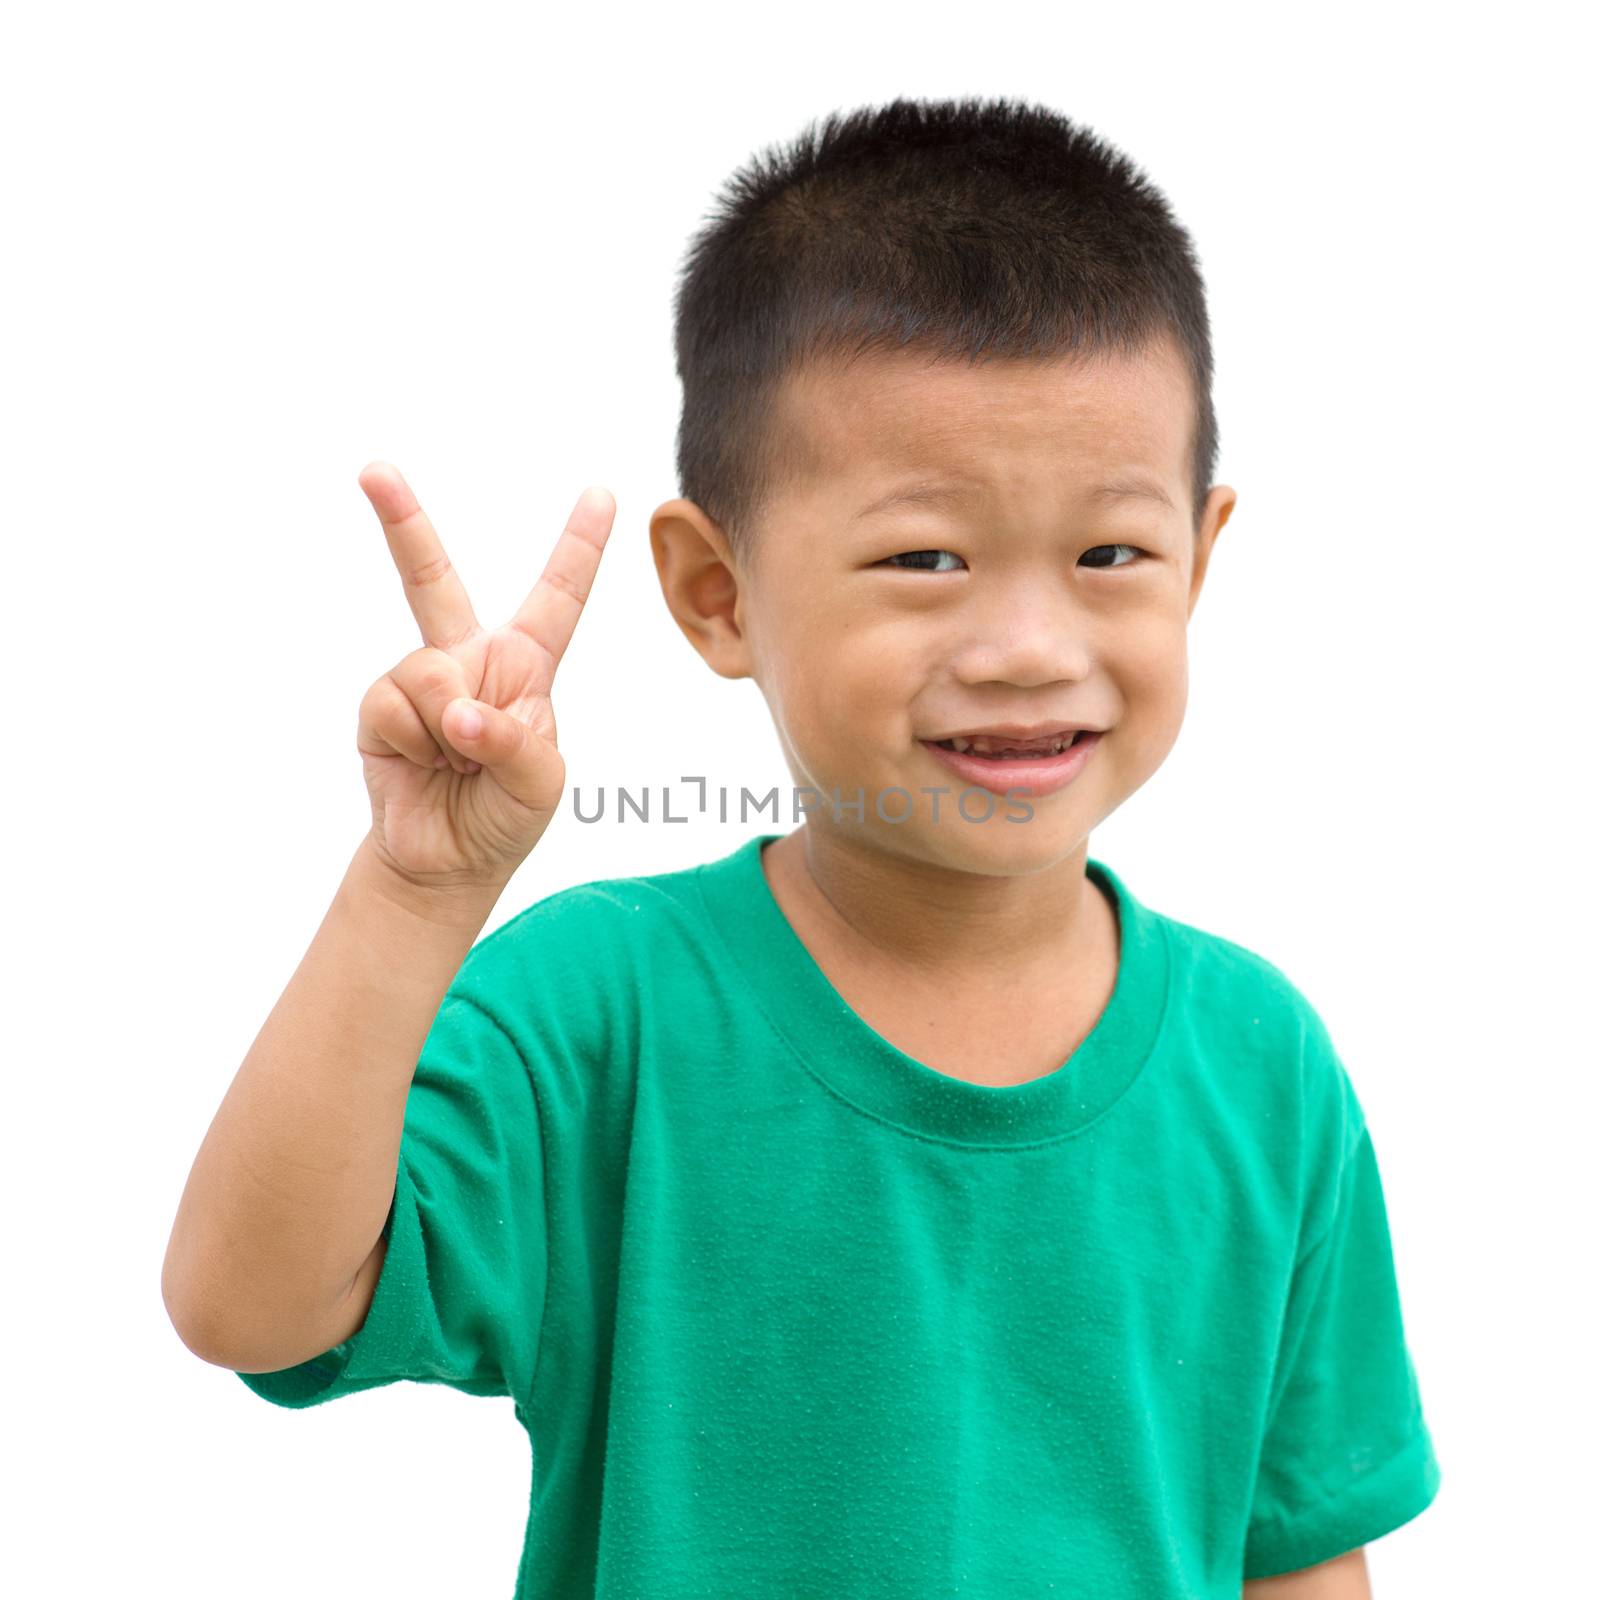 Asian child showing peace hand sign. Portrait of young boy isolated on white background.